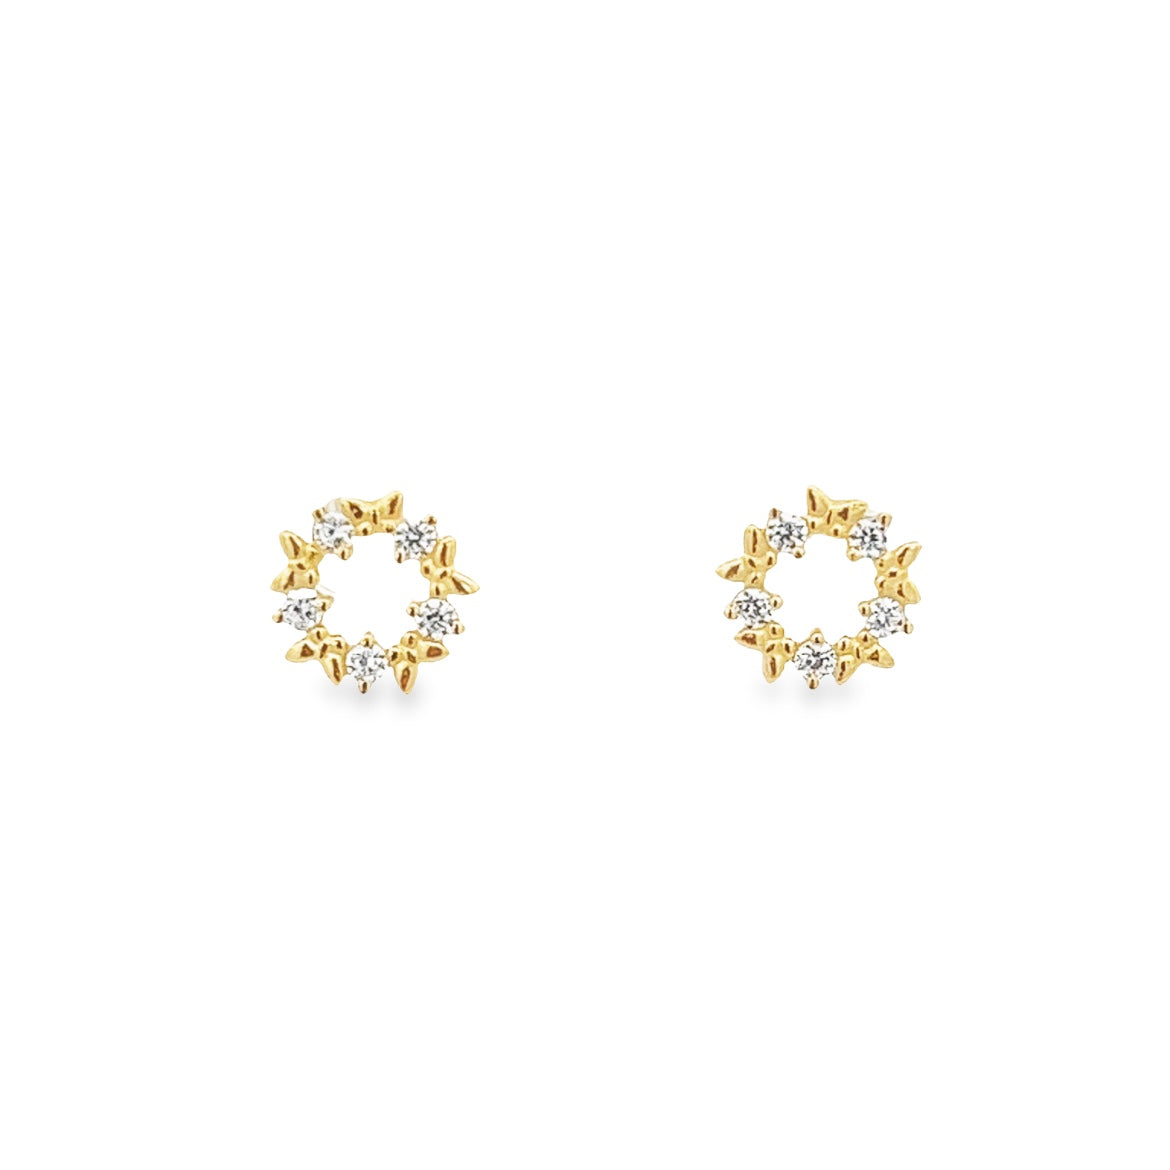 14K GOLD EARRINGS WITH CRYSTALS